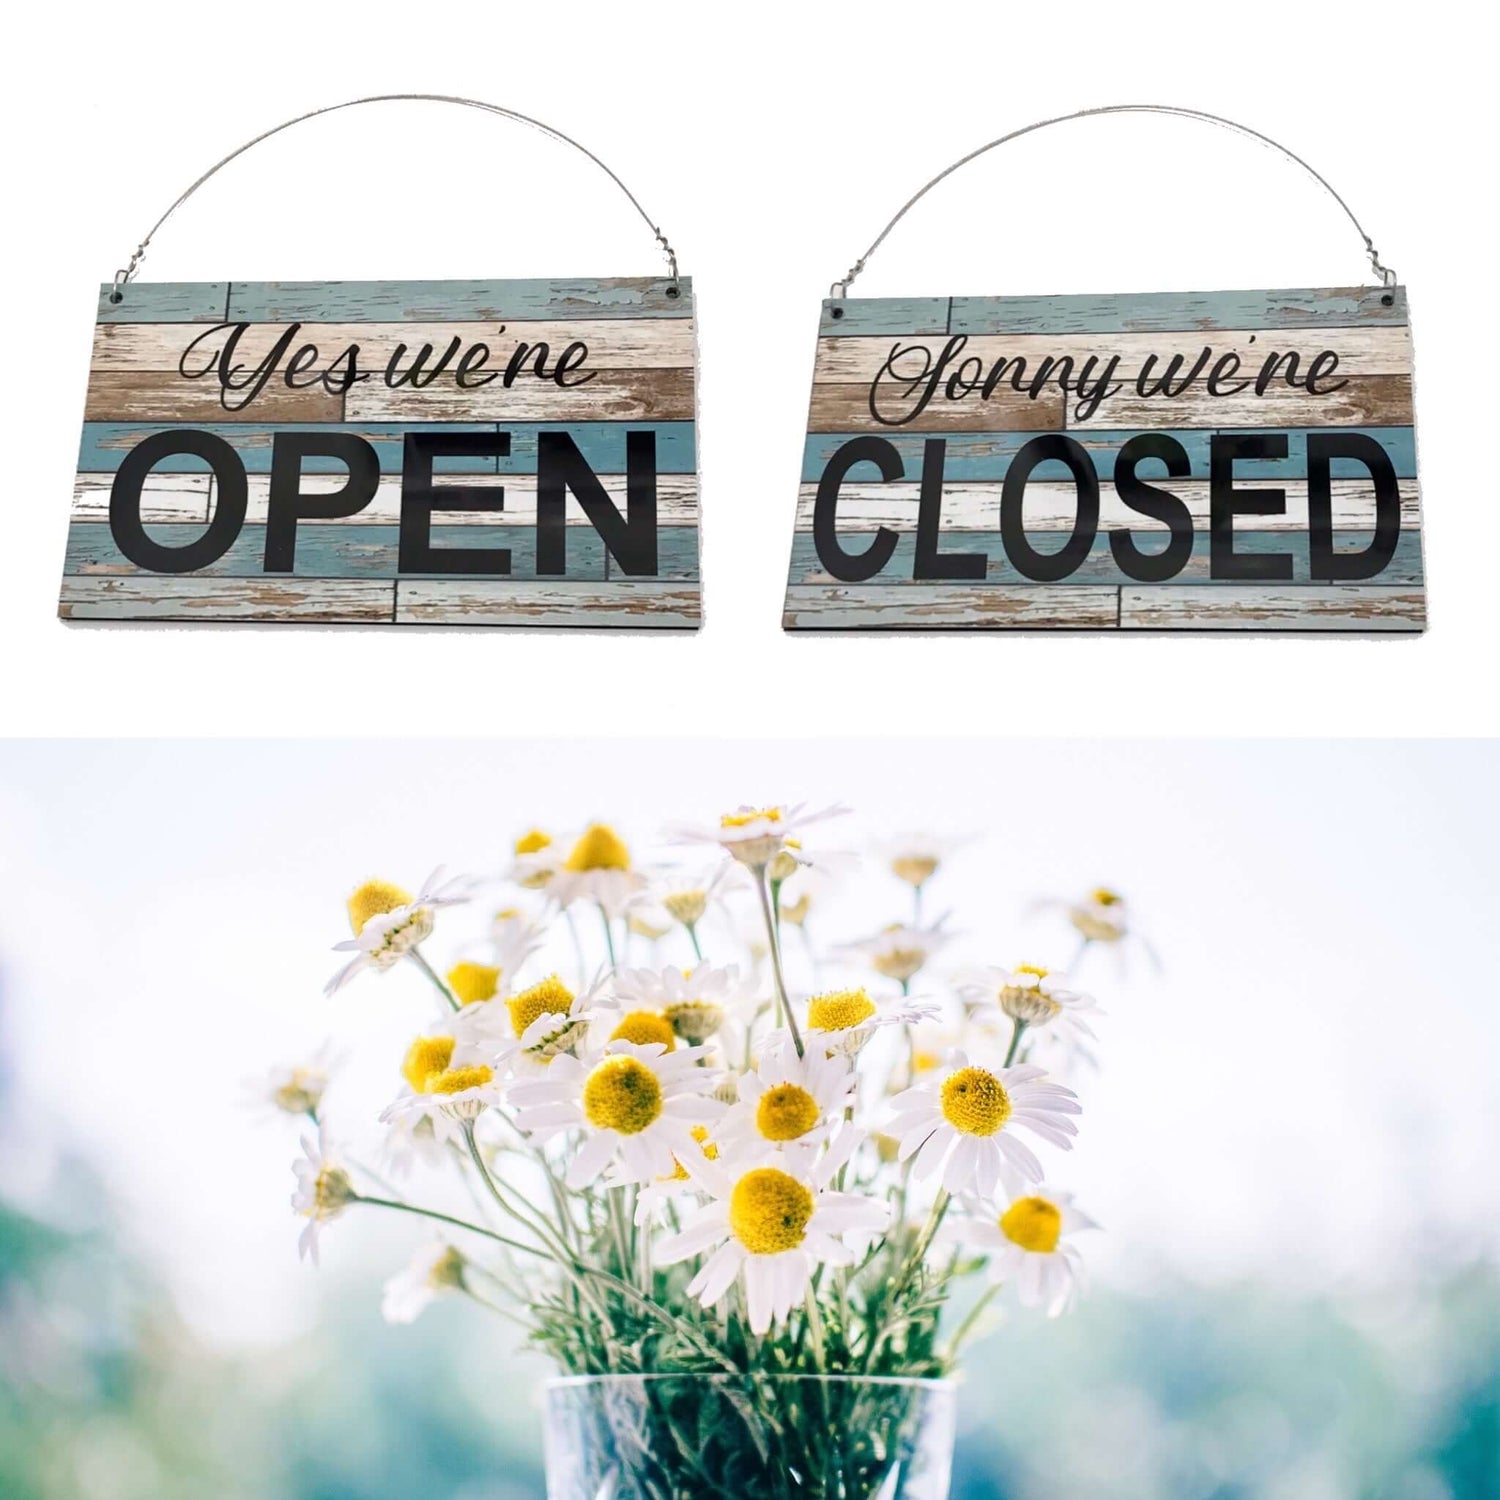 Open & Closed Shop Signs